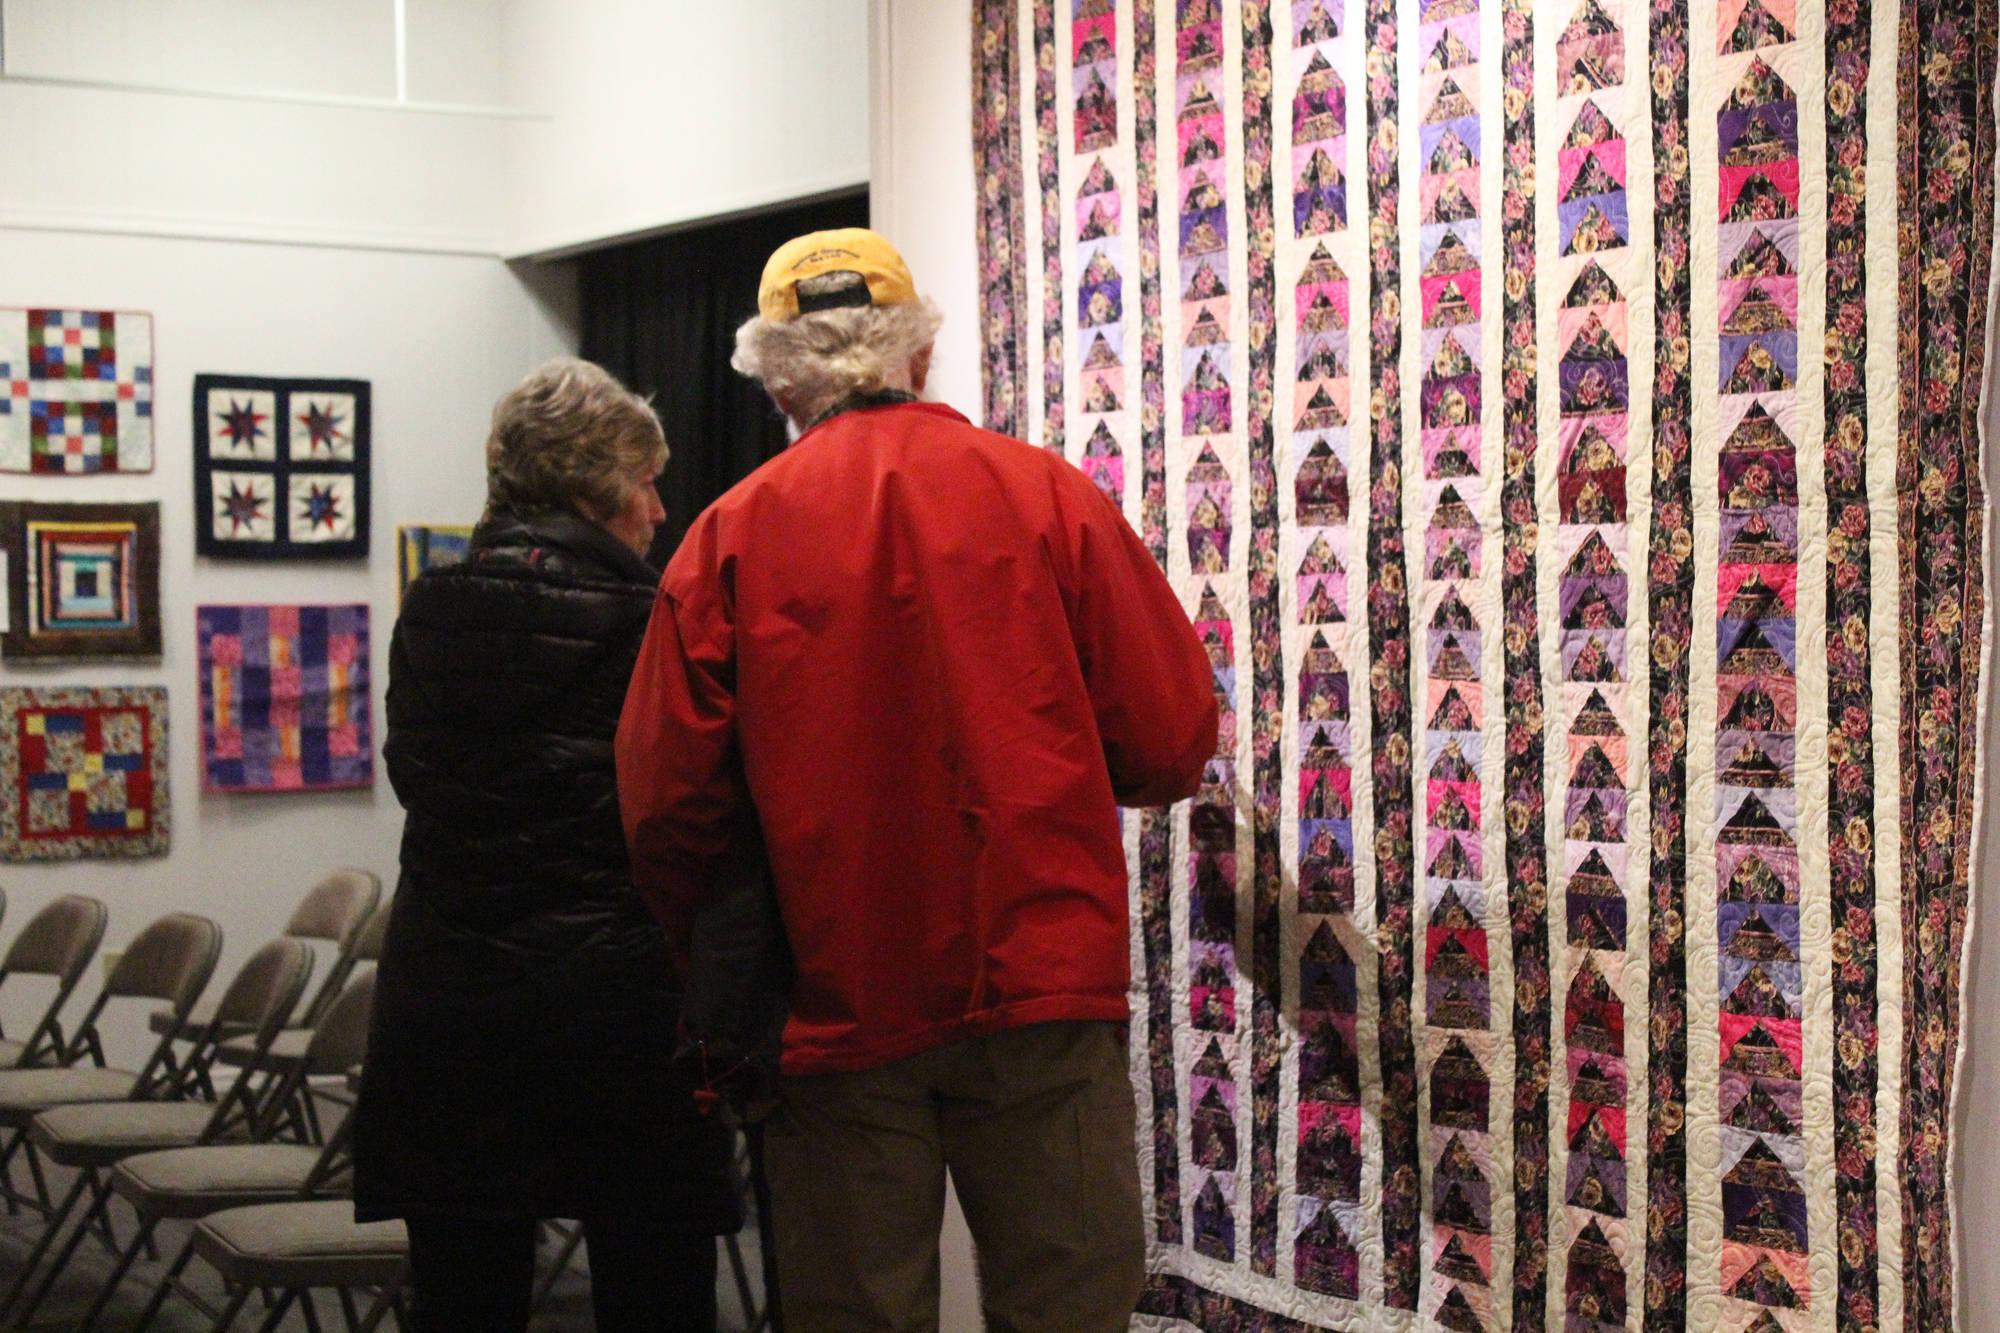 Passersby inspect the work of the Kachemak Bay Quilters during a First Friday exhibit Nov. 3 at the Homer Council on the Arts in Homer. The quilting group has been around for more than 30 years. (Photo by Megan Pacer/Homer News)